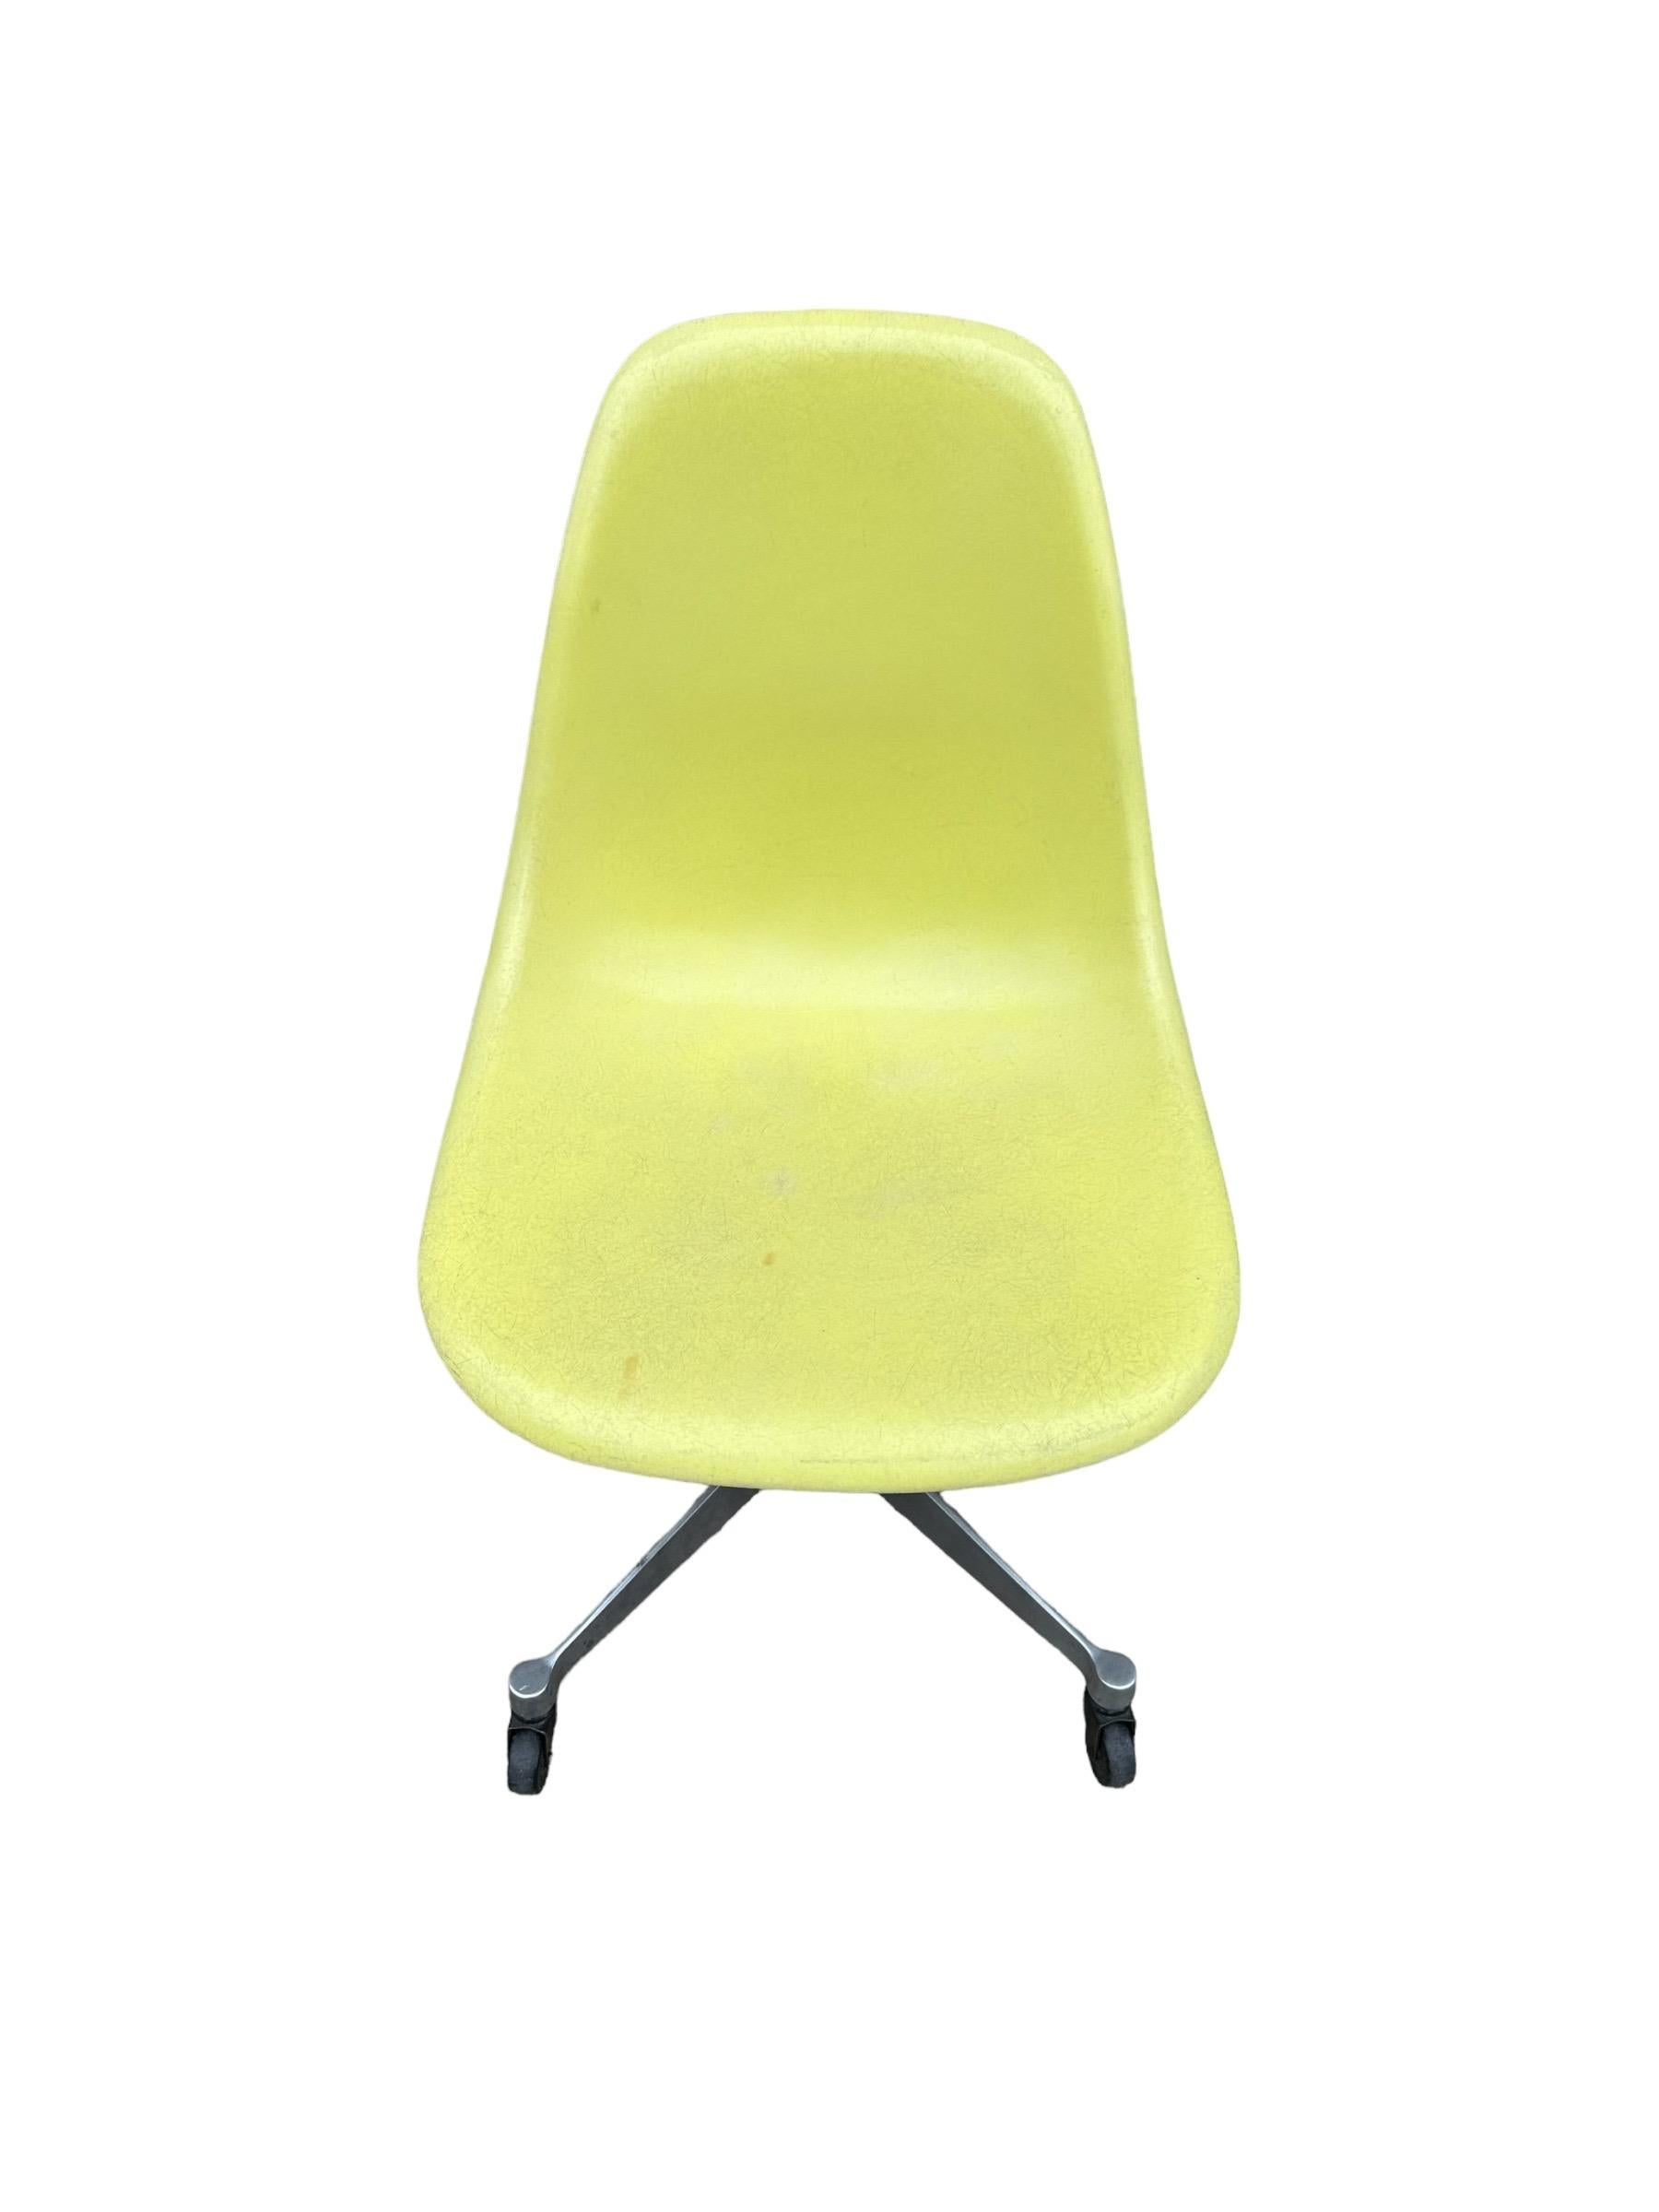 Light yellow fiberglass shell desk chair by Herman Miller. Designed by Charles and Ray Eames. Model PSCC, with swivel base and casters. In good working condition. No holes or cracks, all parts intact. Signed and guaranteed authentic. Comfortable